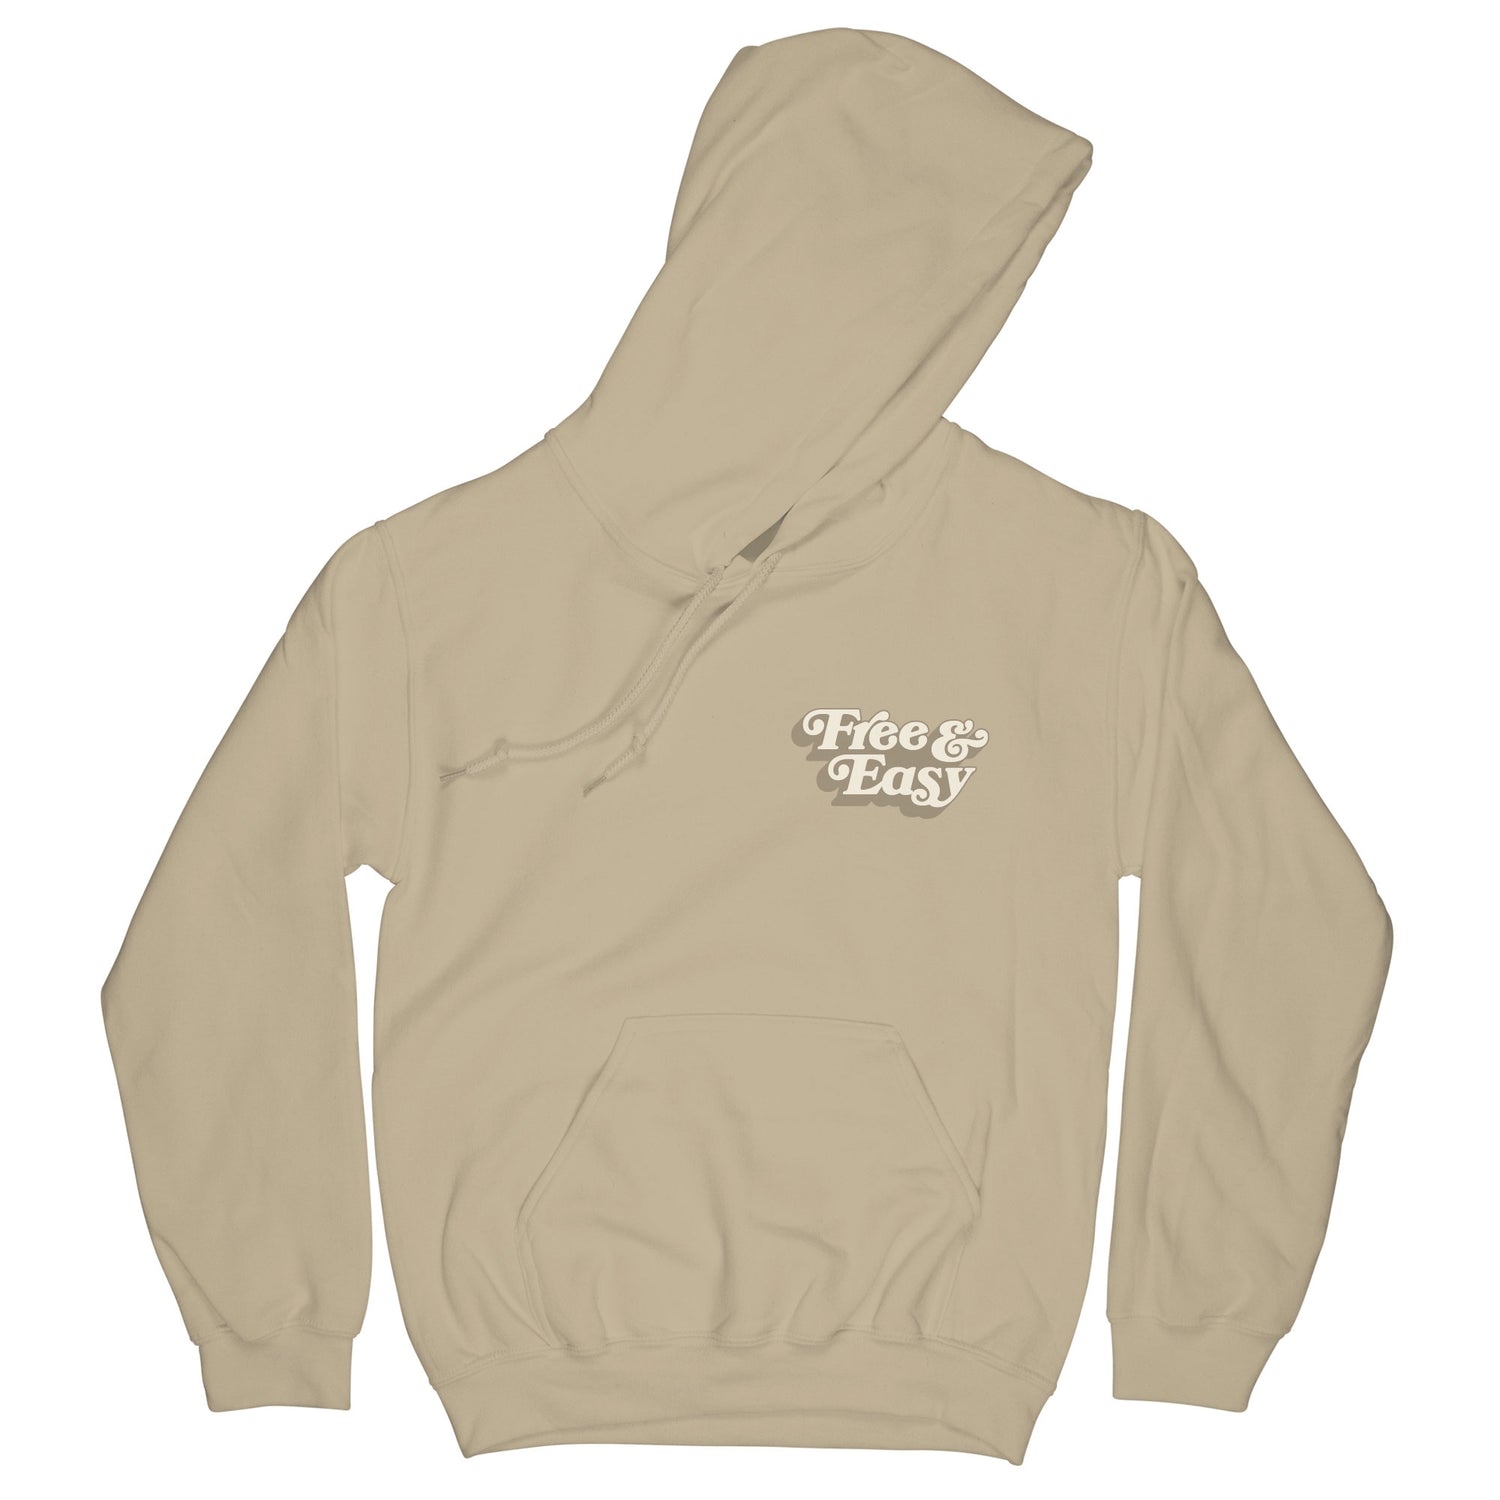 Don't Trip OG Hoodie in sand with white and beige Free & Easy logo design on front left side on a white background - Free & Easy